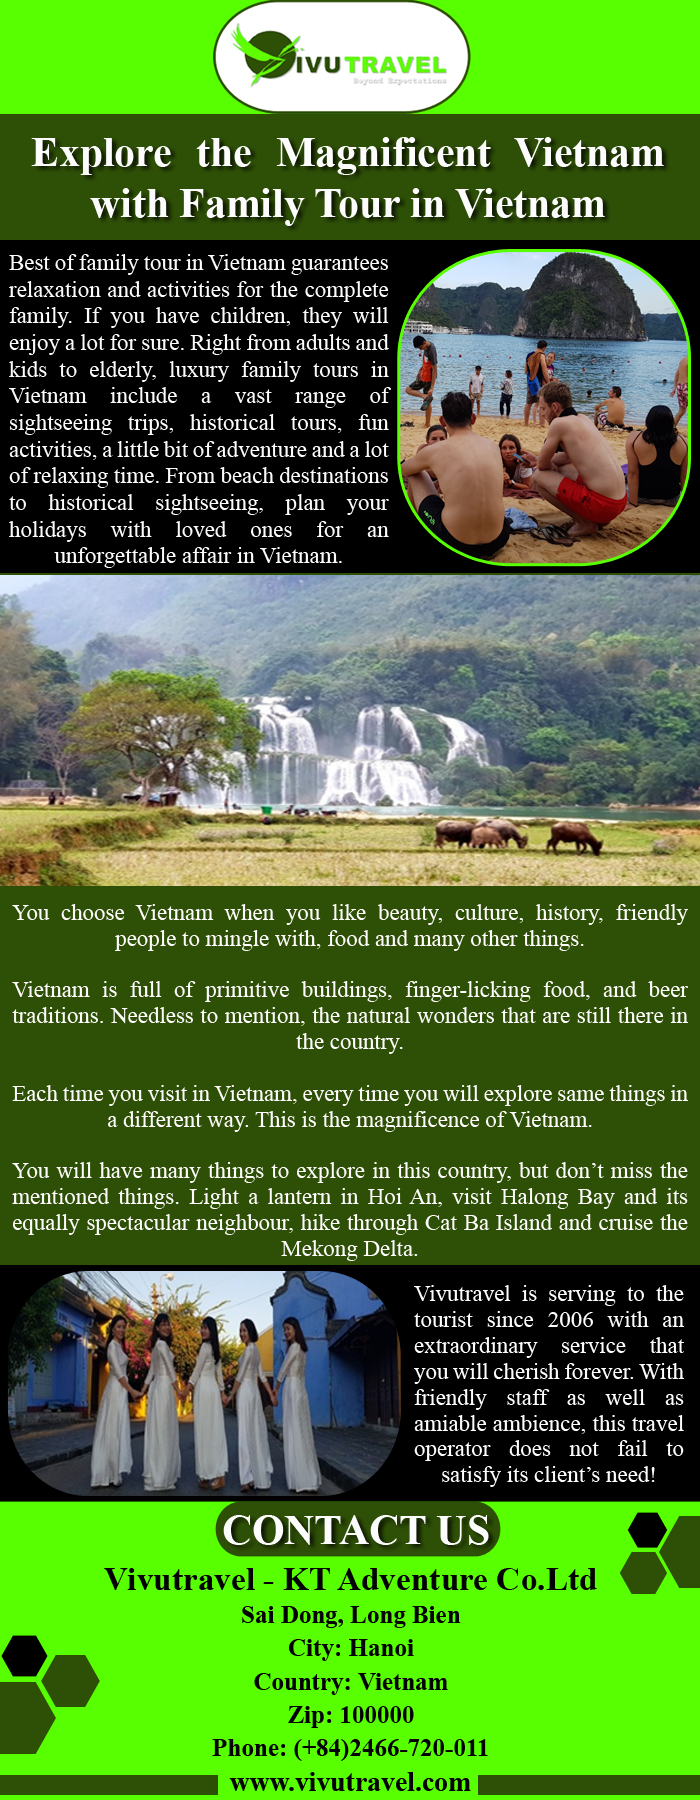 Explore the Magnificent Vietnam with Family Tour in Vietnam.png  by vivutravel